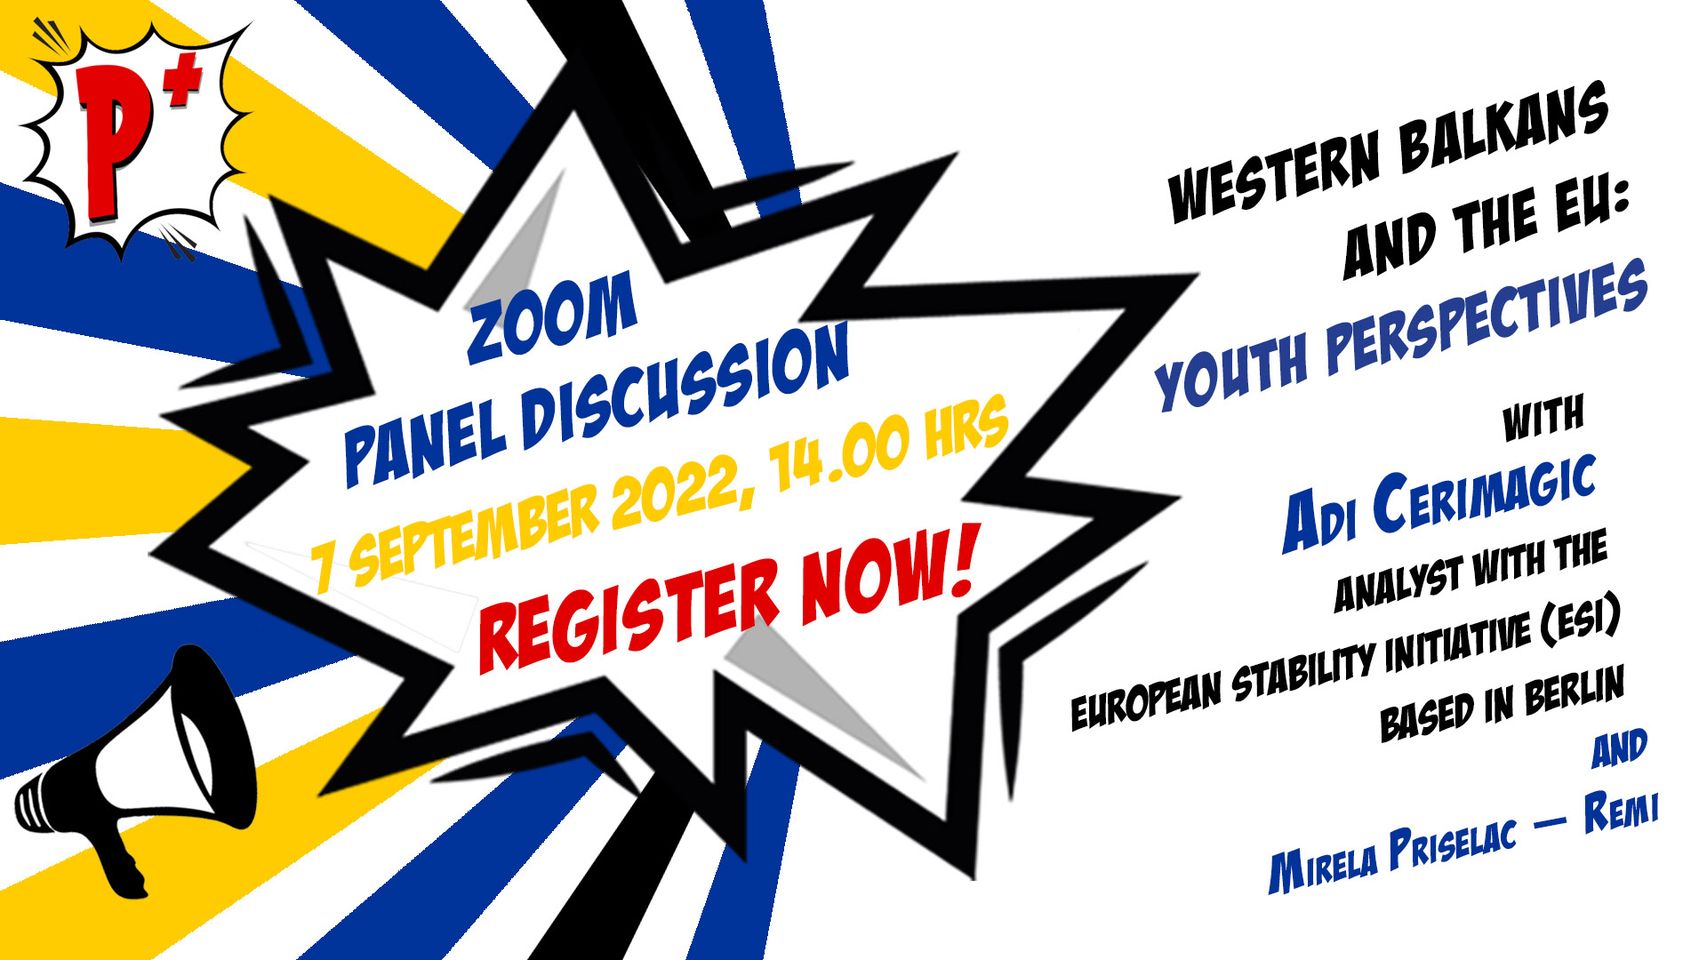 Western Balkans and the EU: YOUTH PERSPECTIVES